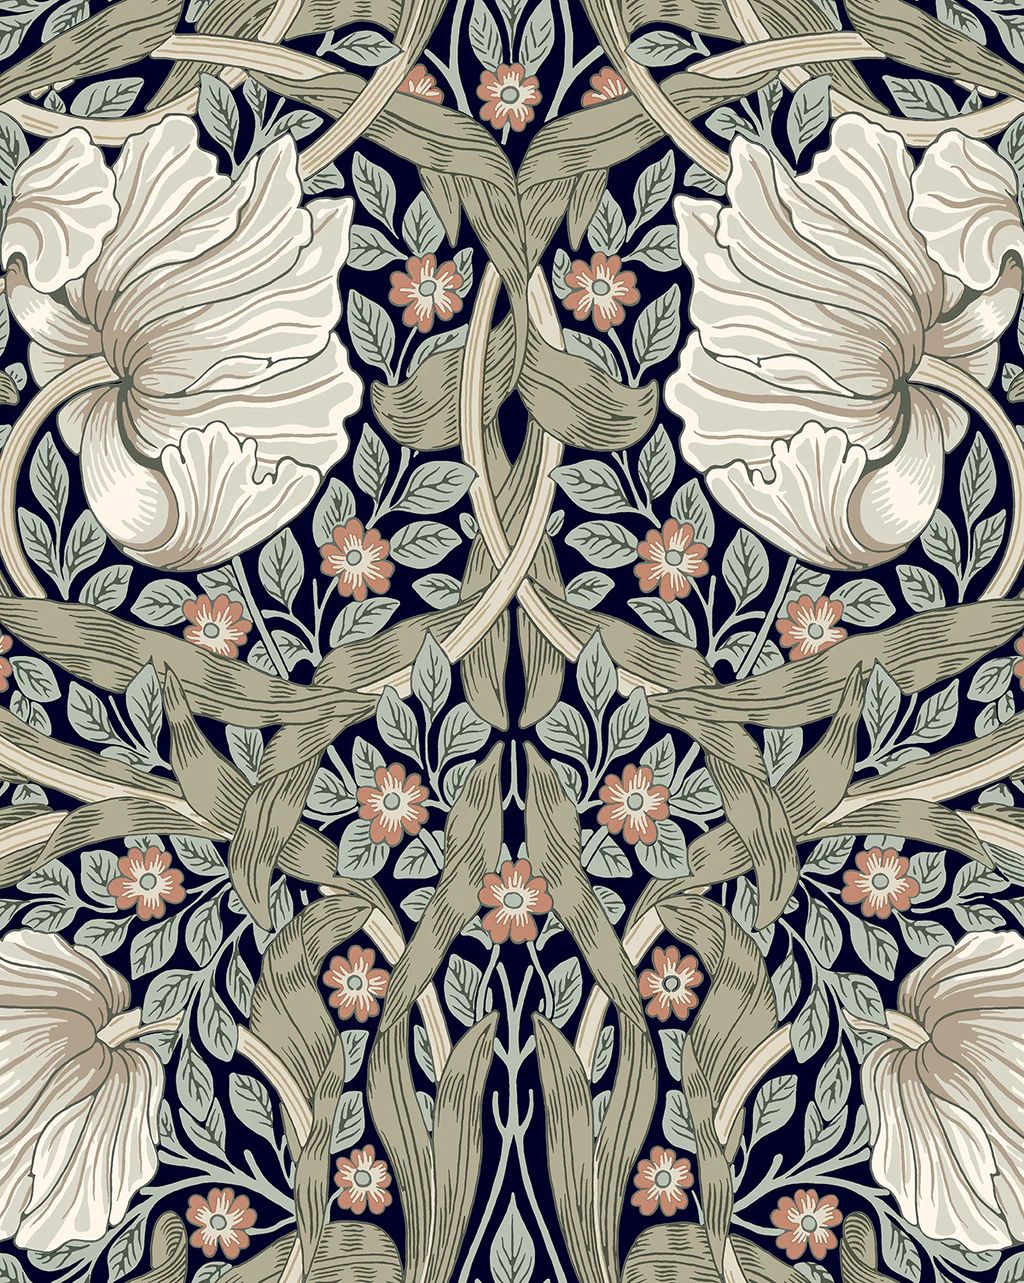 Morris & Co. x McGee & Co. Pimpernel Ink Wallpaper | McGee & Co.